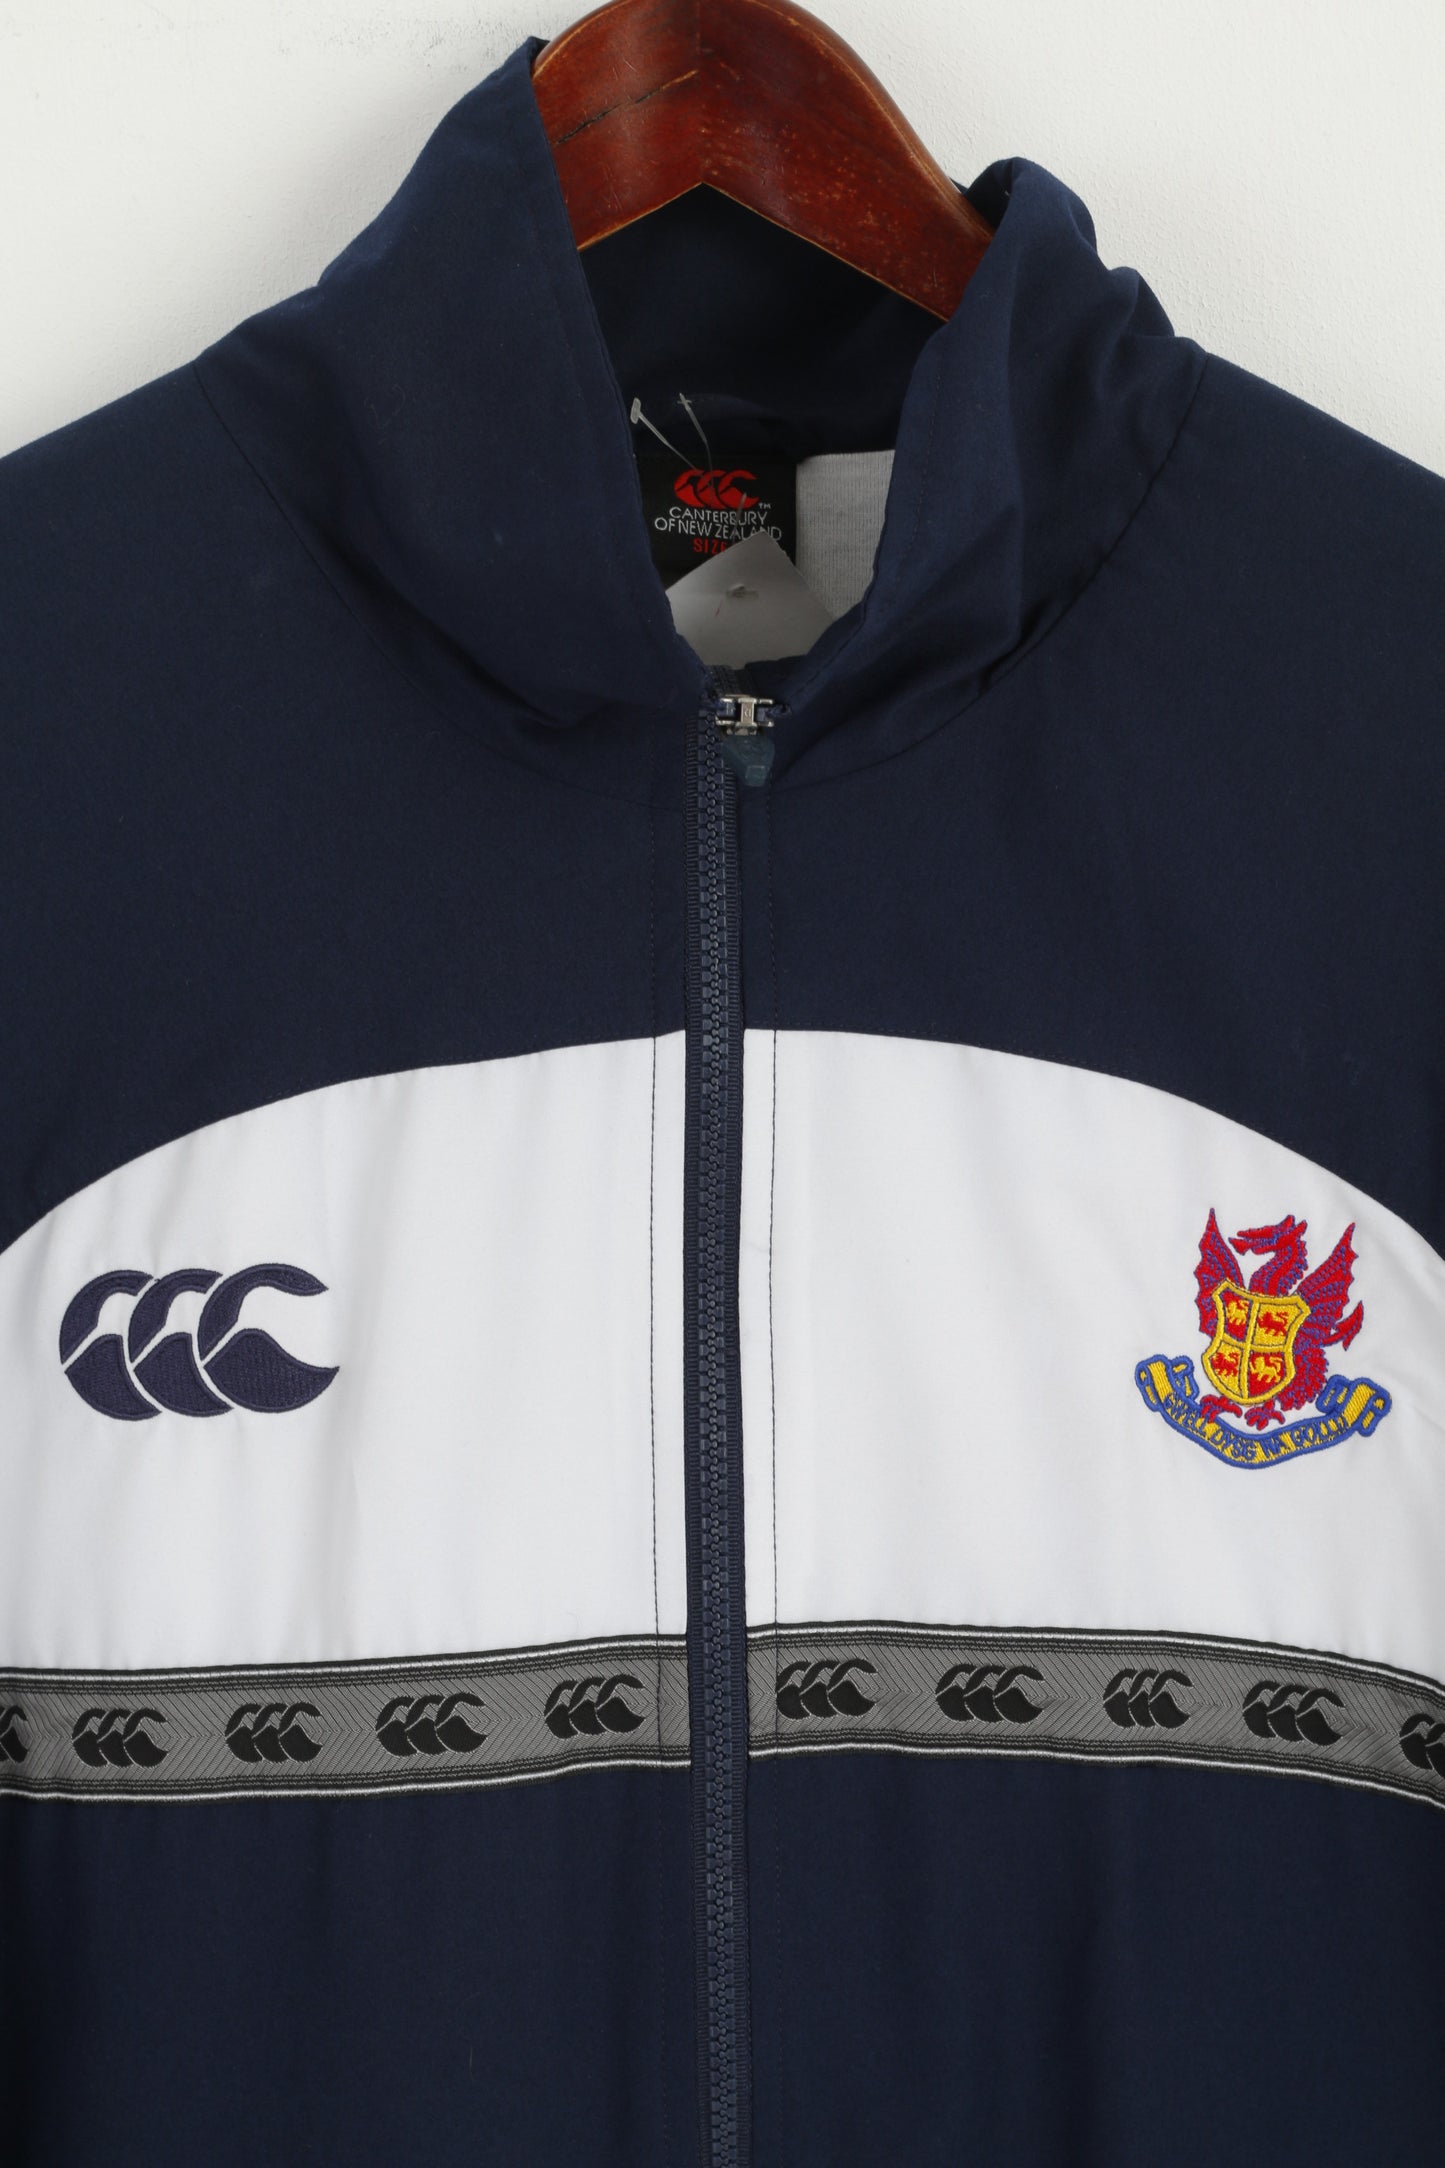 Canterbury Men L Jacket Navy Rugby Red Welsh Dragon Wales Full Zipper Activewear Top